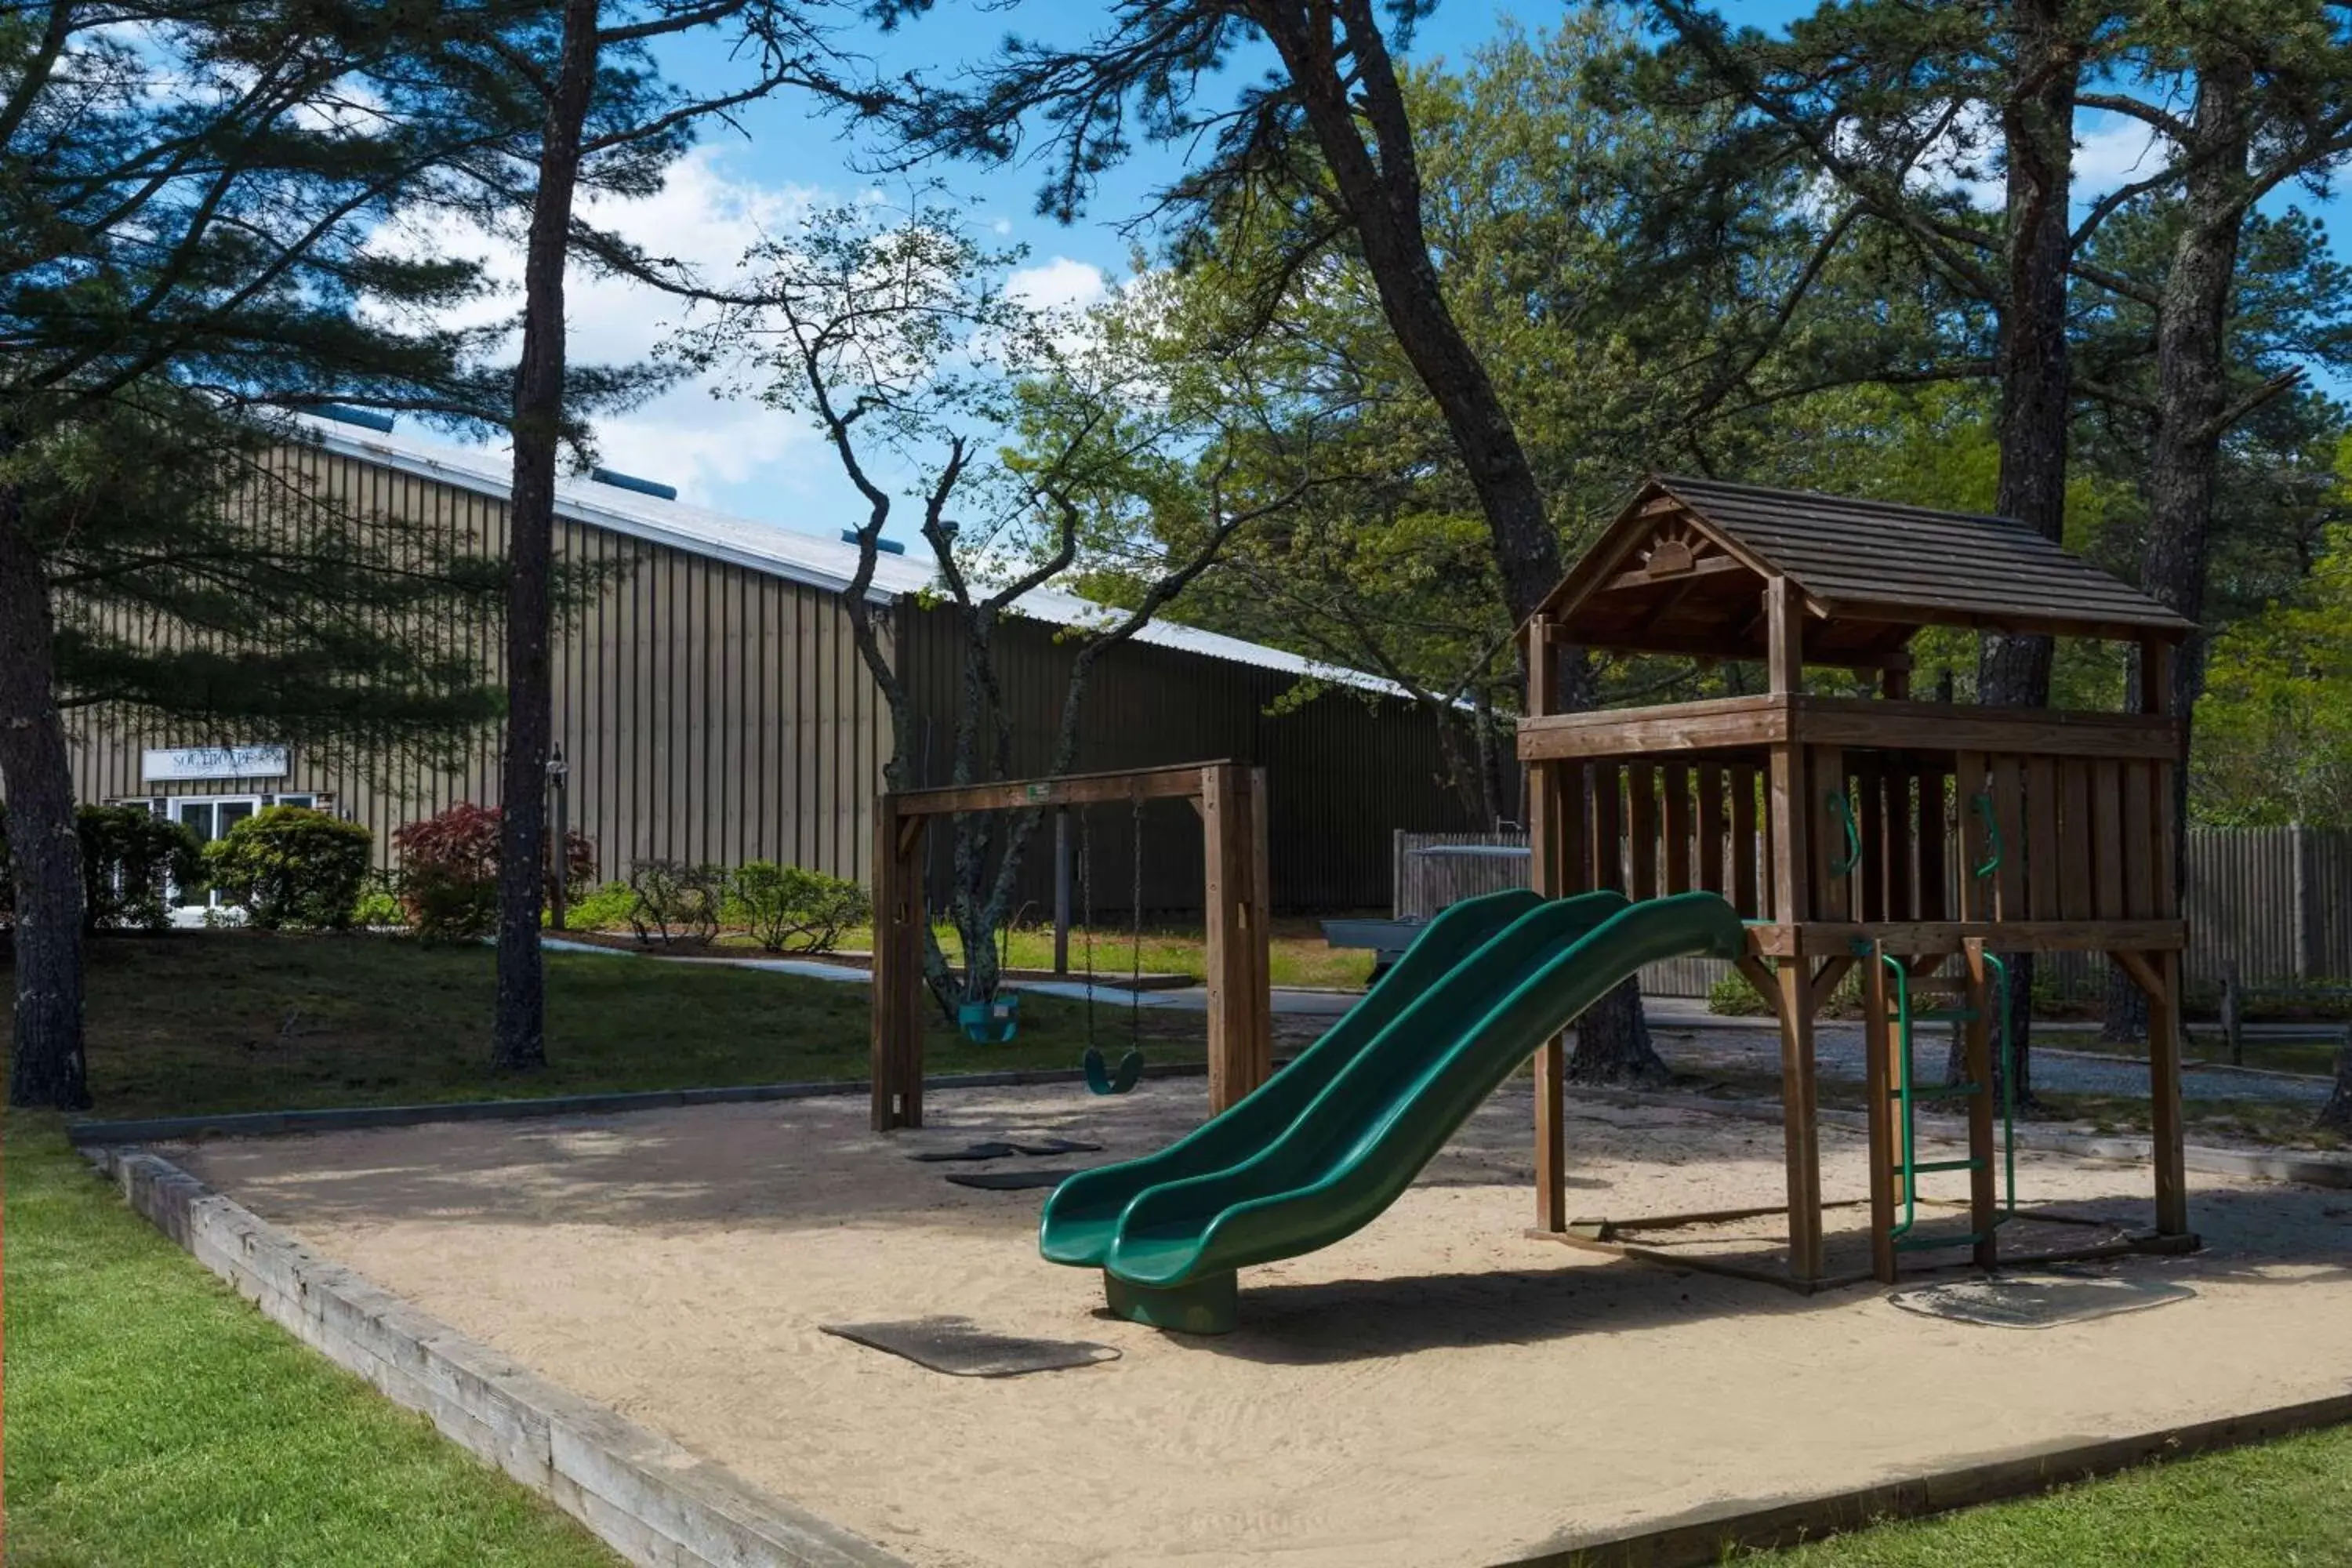 Children play ground, Property Building in Southcape Resort Mashpee a Ramada by Wyndham